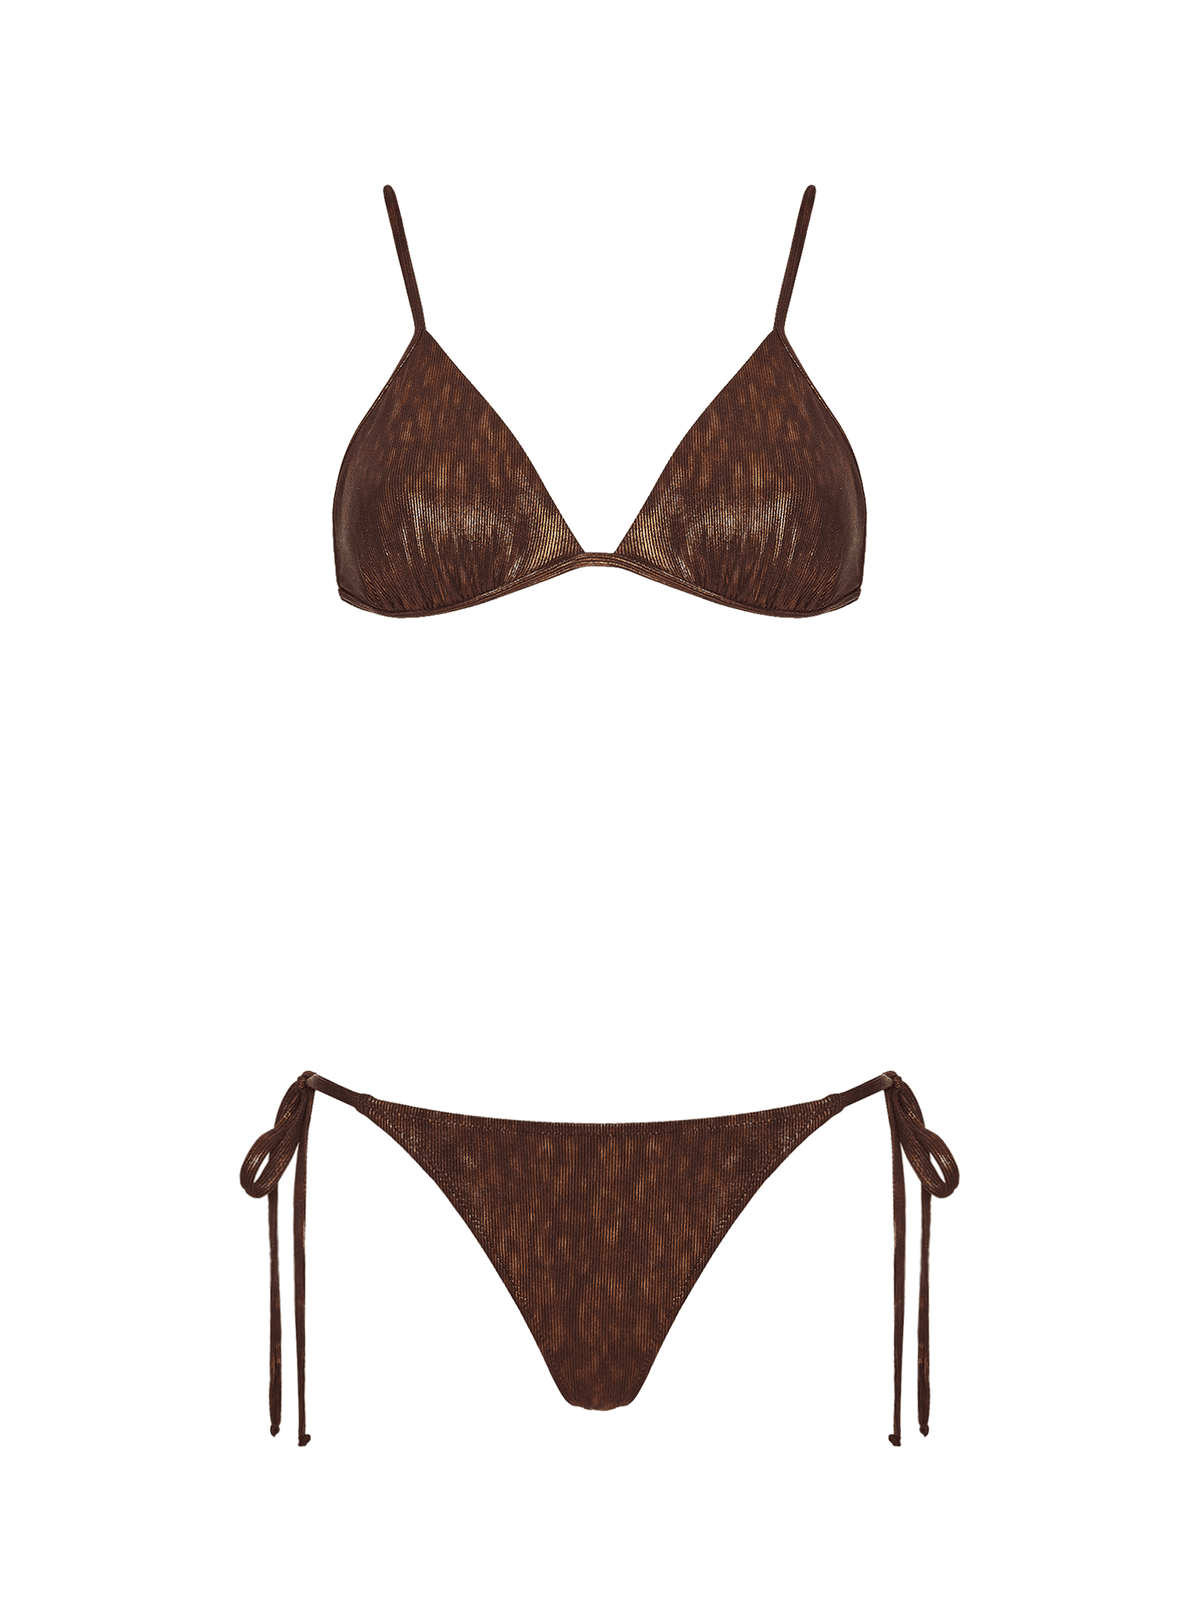 LAST PIECE: The Bisou in Brown Tortuga